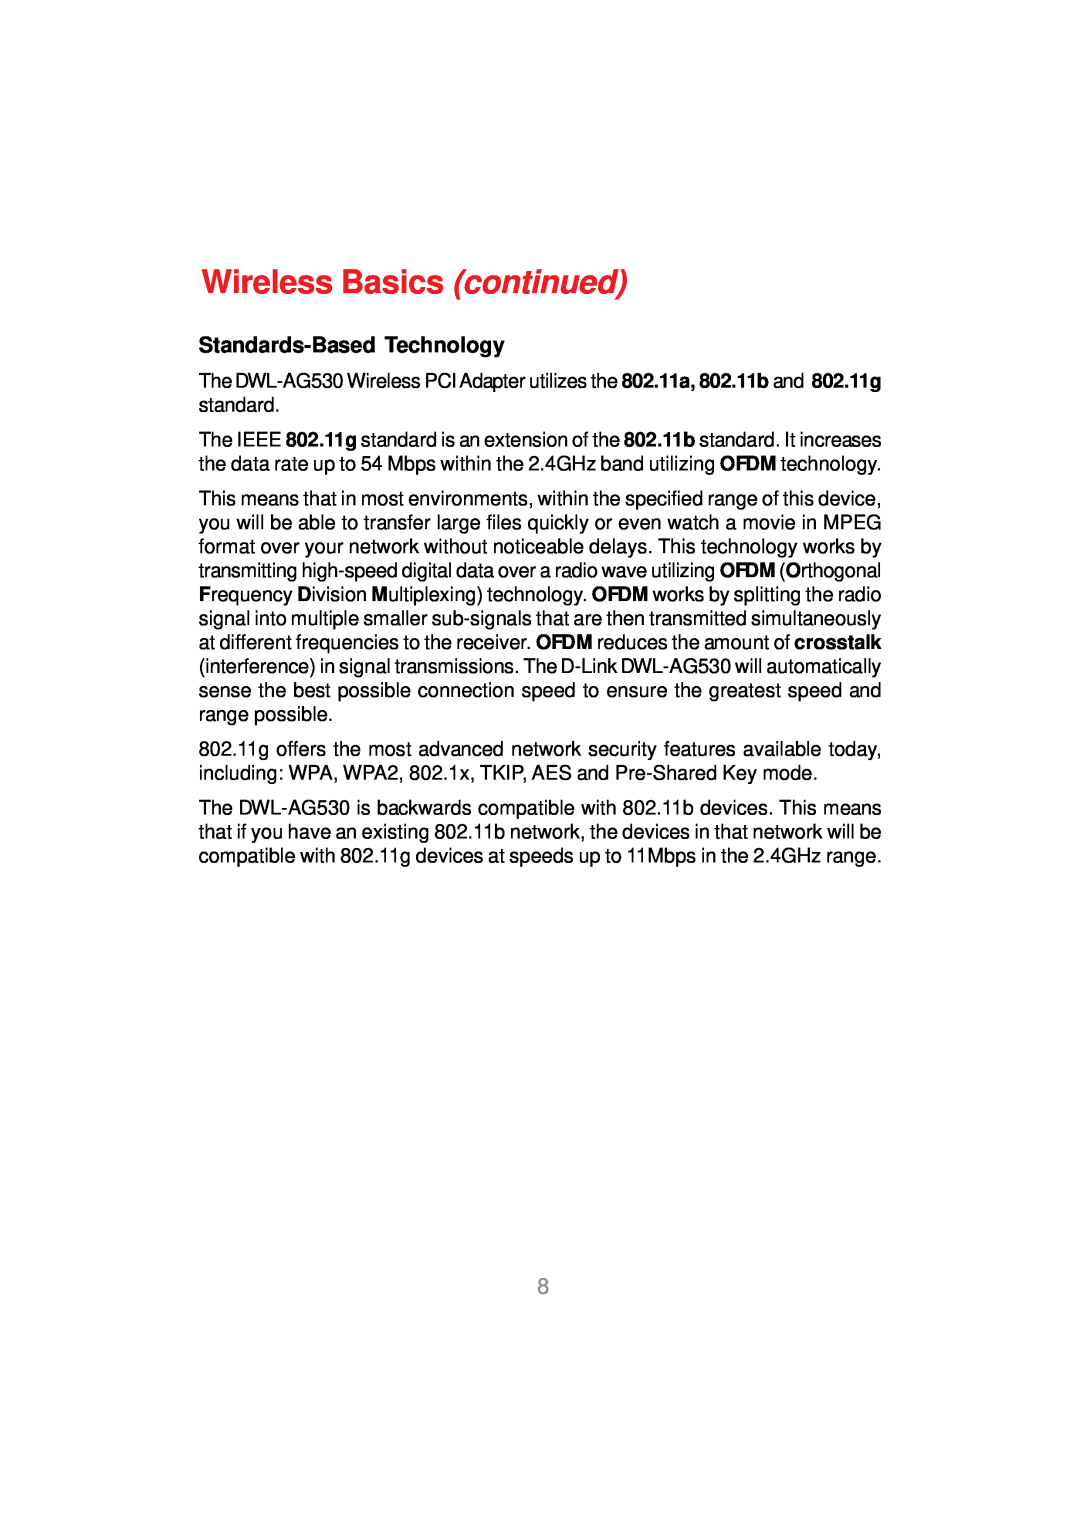 D-Link DWL-AG530 manual Wireless Basics continued, Standards-Based Technology 